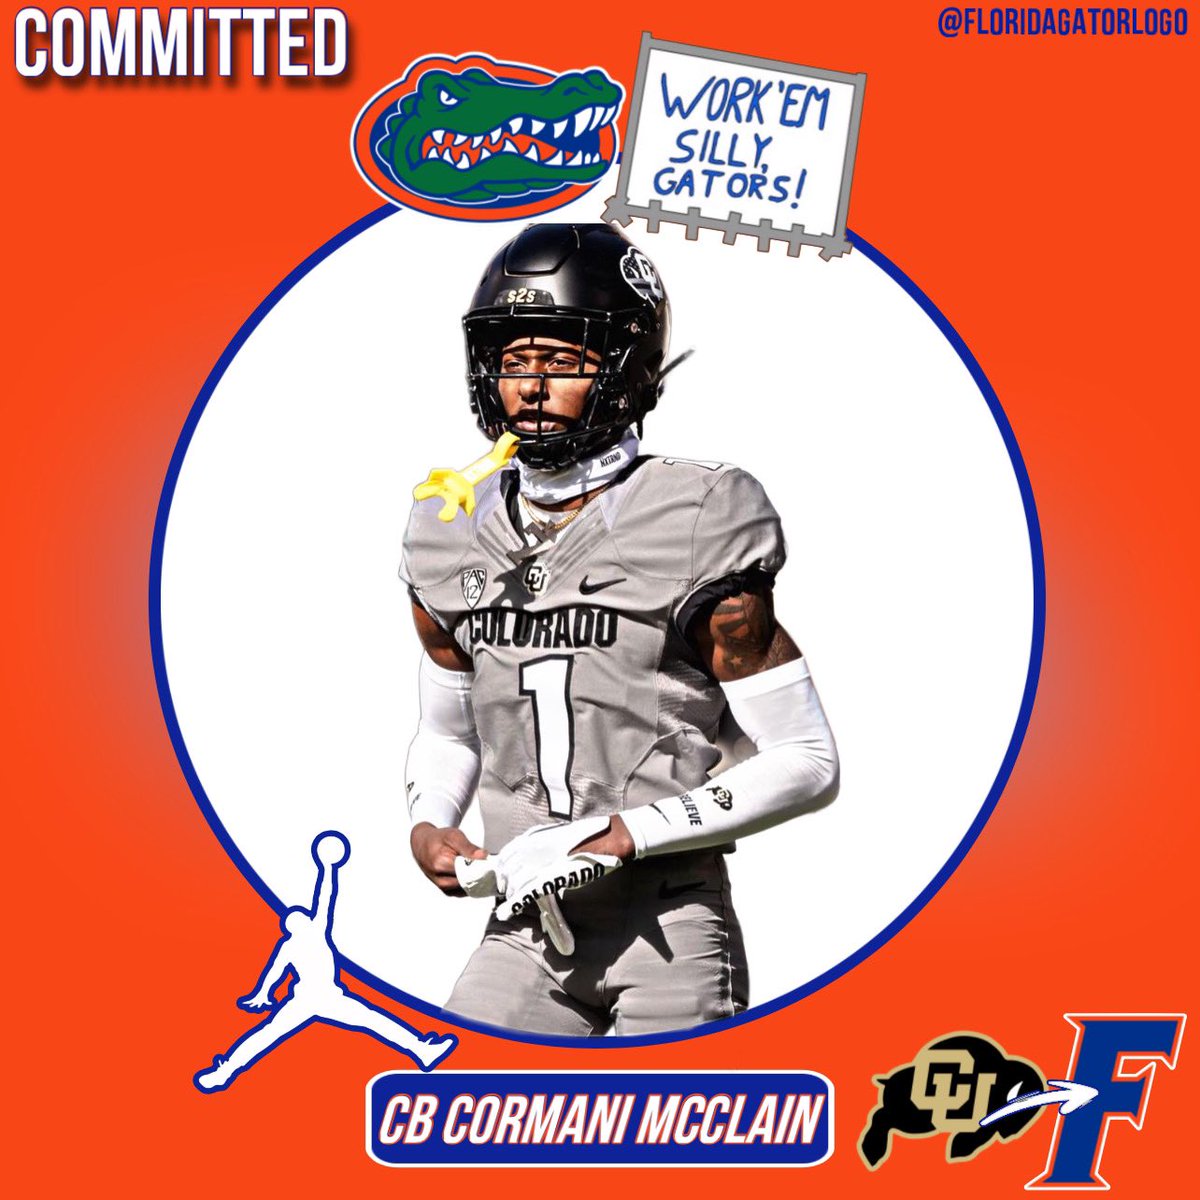 CHOMP CHOMP❗️Former Colorado CB and 5-star recruit Cormani McClain has committed to the Florida Gators! 

It’ll be as a preferred walk-on reportedly, and he’ll have the opportunity to earn a scholarship. 

- 6’2” 165 pounds 
- From Lakeland, Florida 
- Will have 3 years of